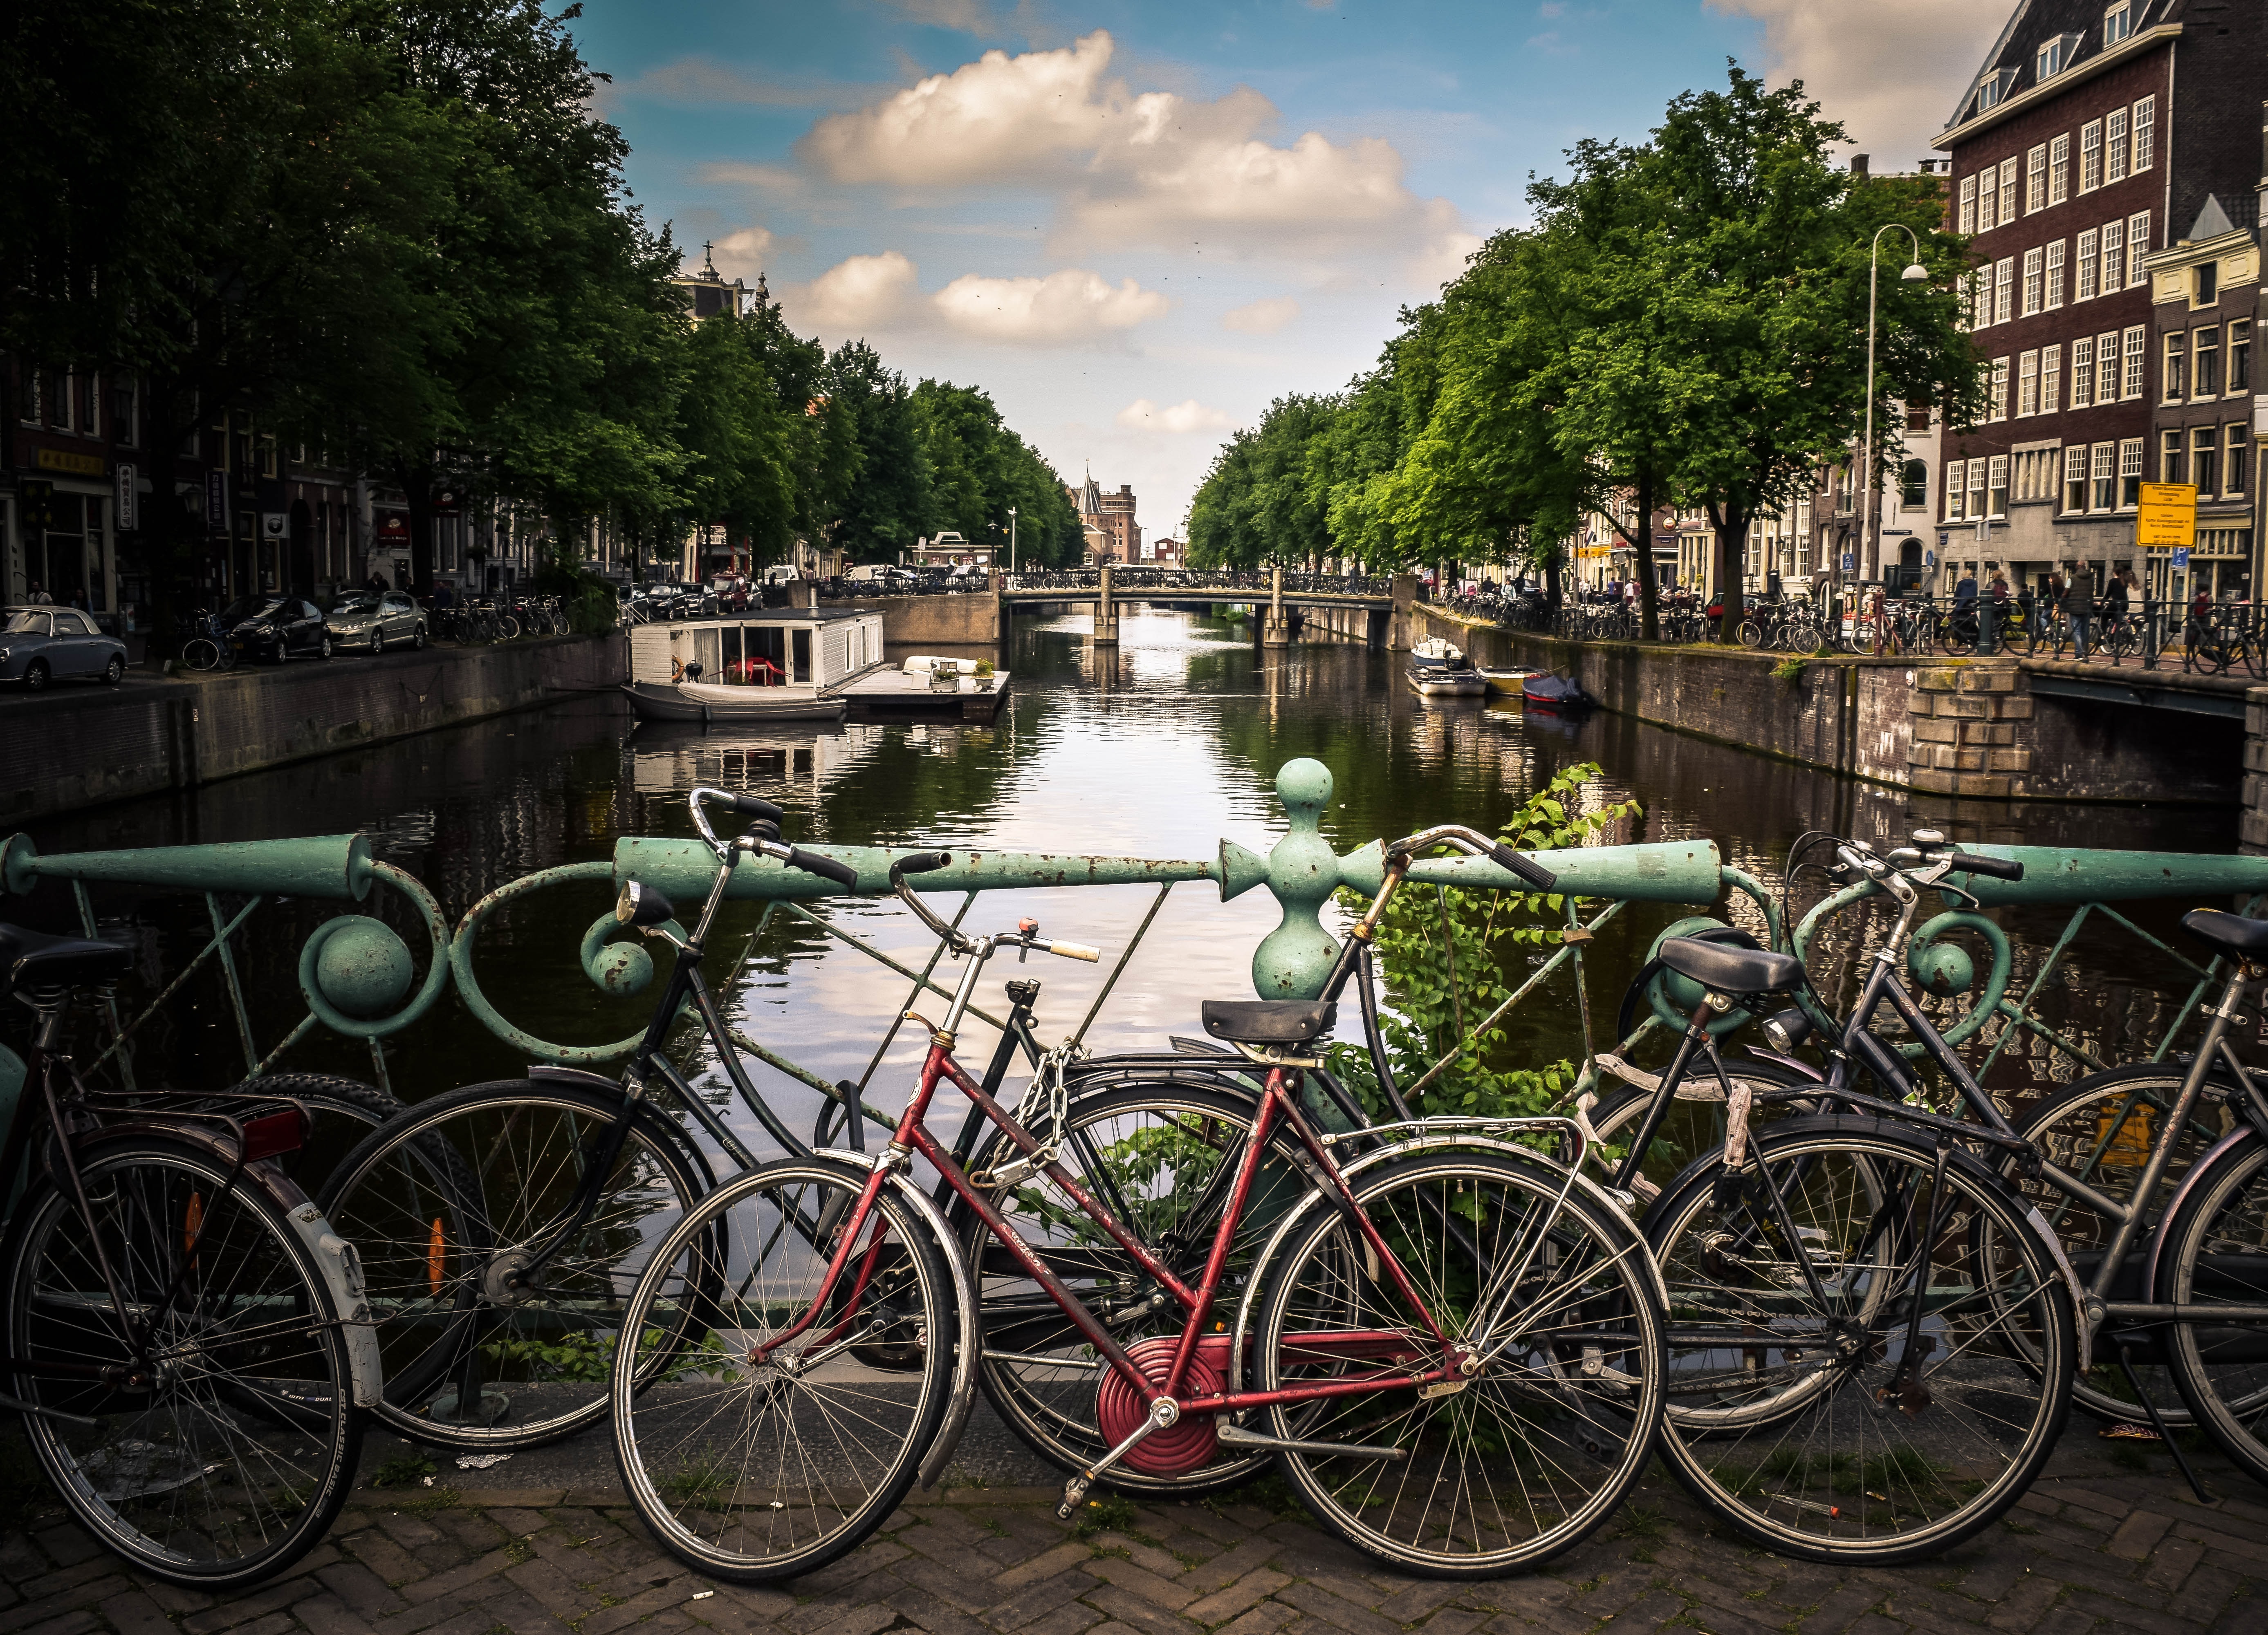 The 10 Best Things To Do In The Netherlands